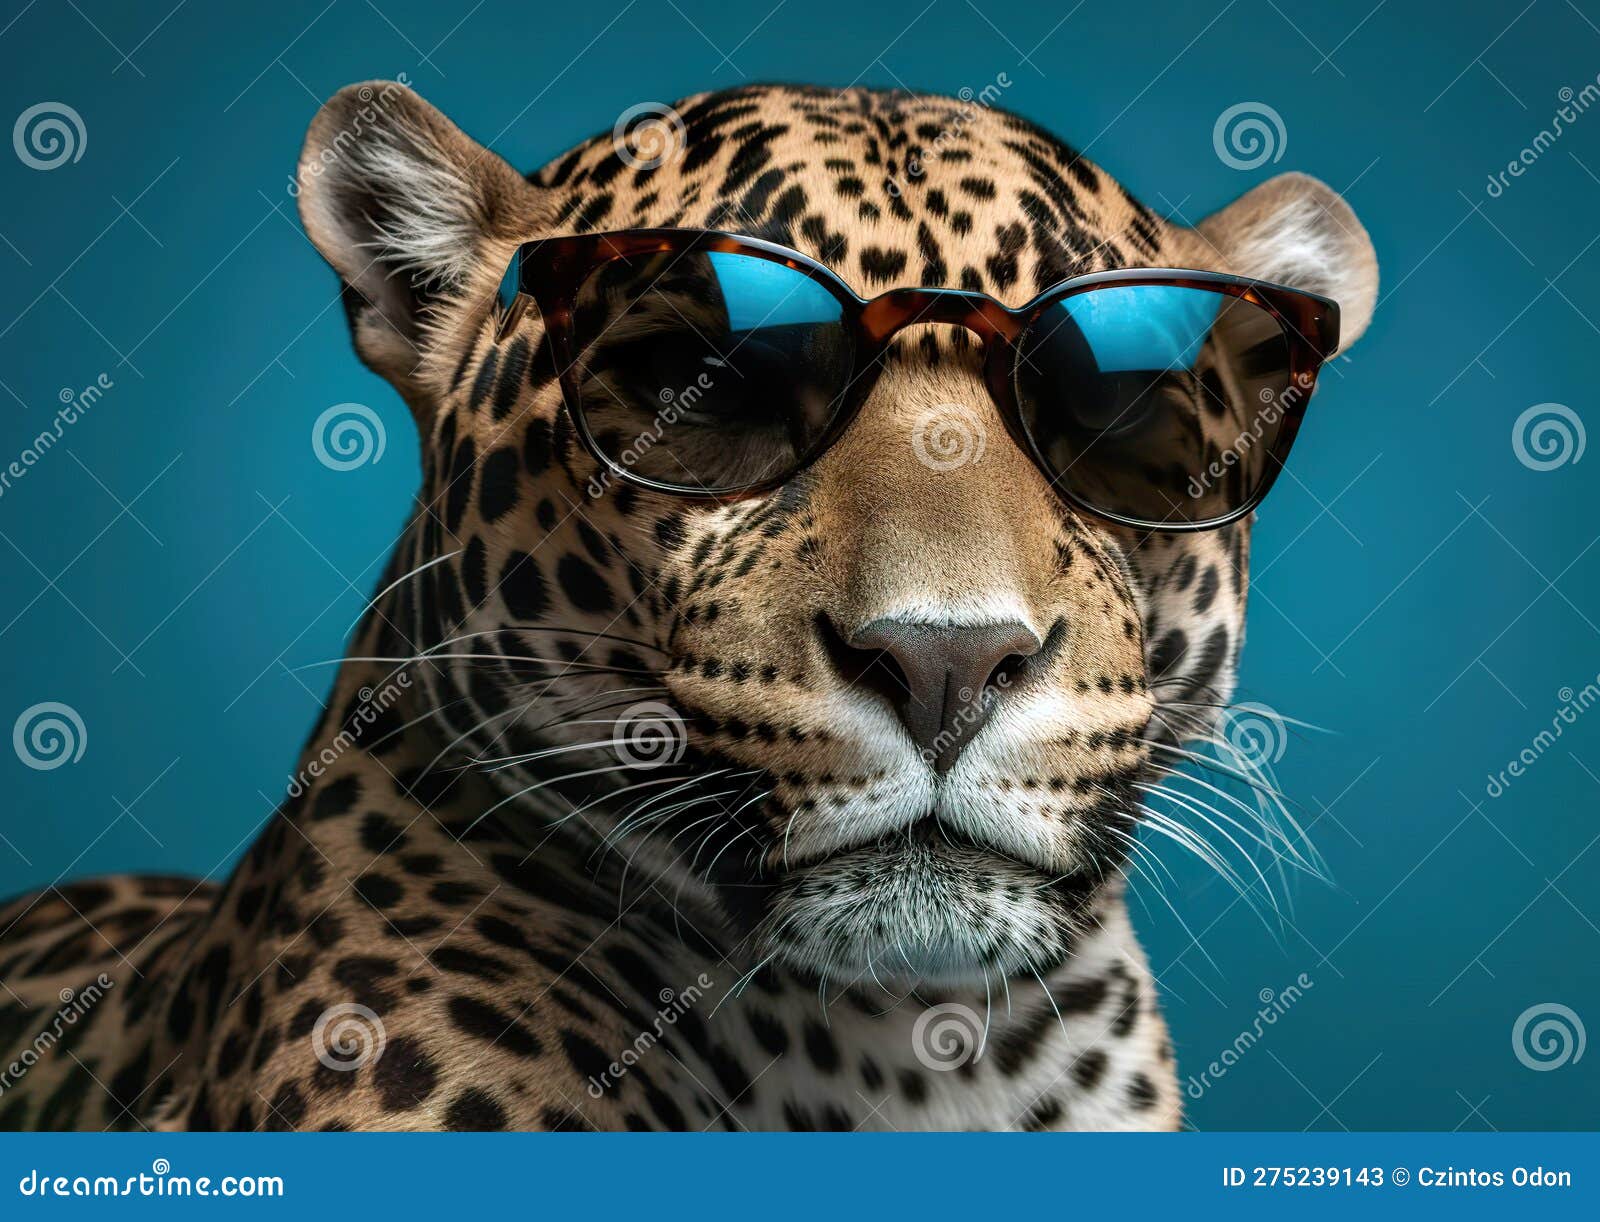 Cool Jaguar Posing in Sunglasses Against a Blue Background. Stock ...